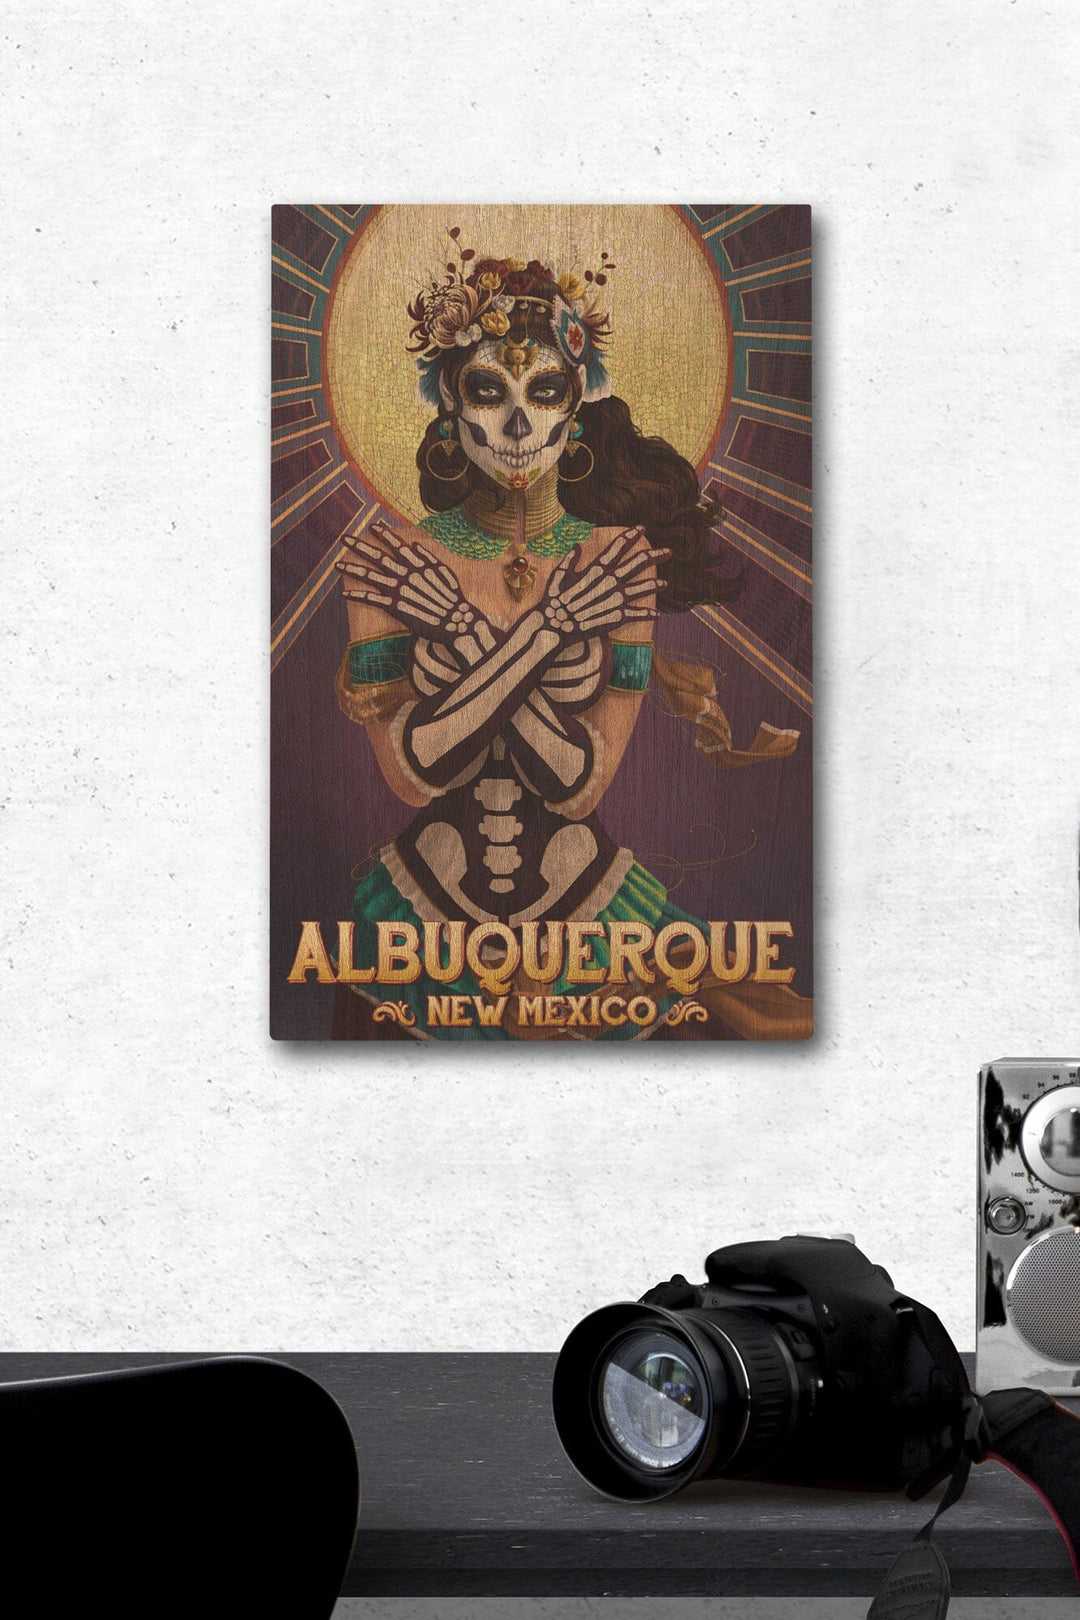 Albuquerque, New Mexico, Day of the Dead, Crossbones, Lantern Press Artwork, Wood Signs and Postcards Wood Lantern Press 12 x 18 Wood Gallery Print 